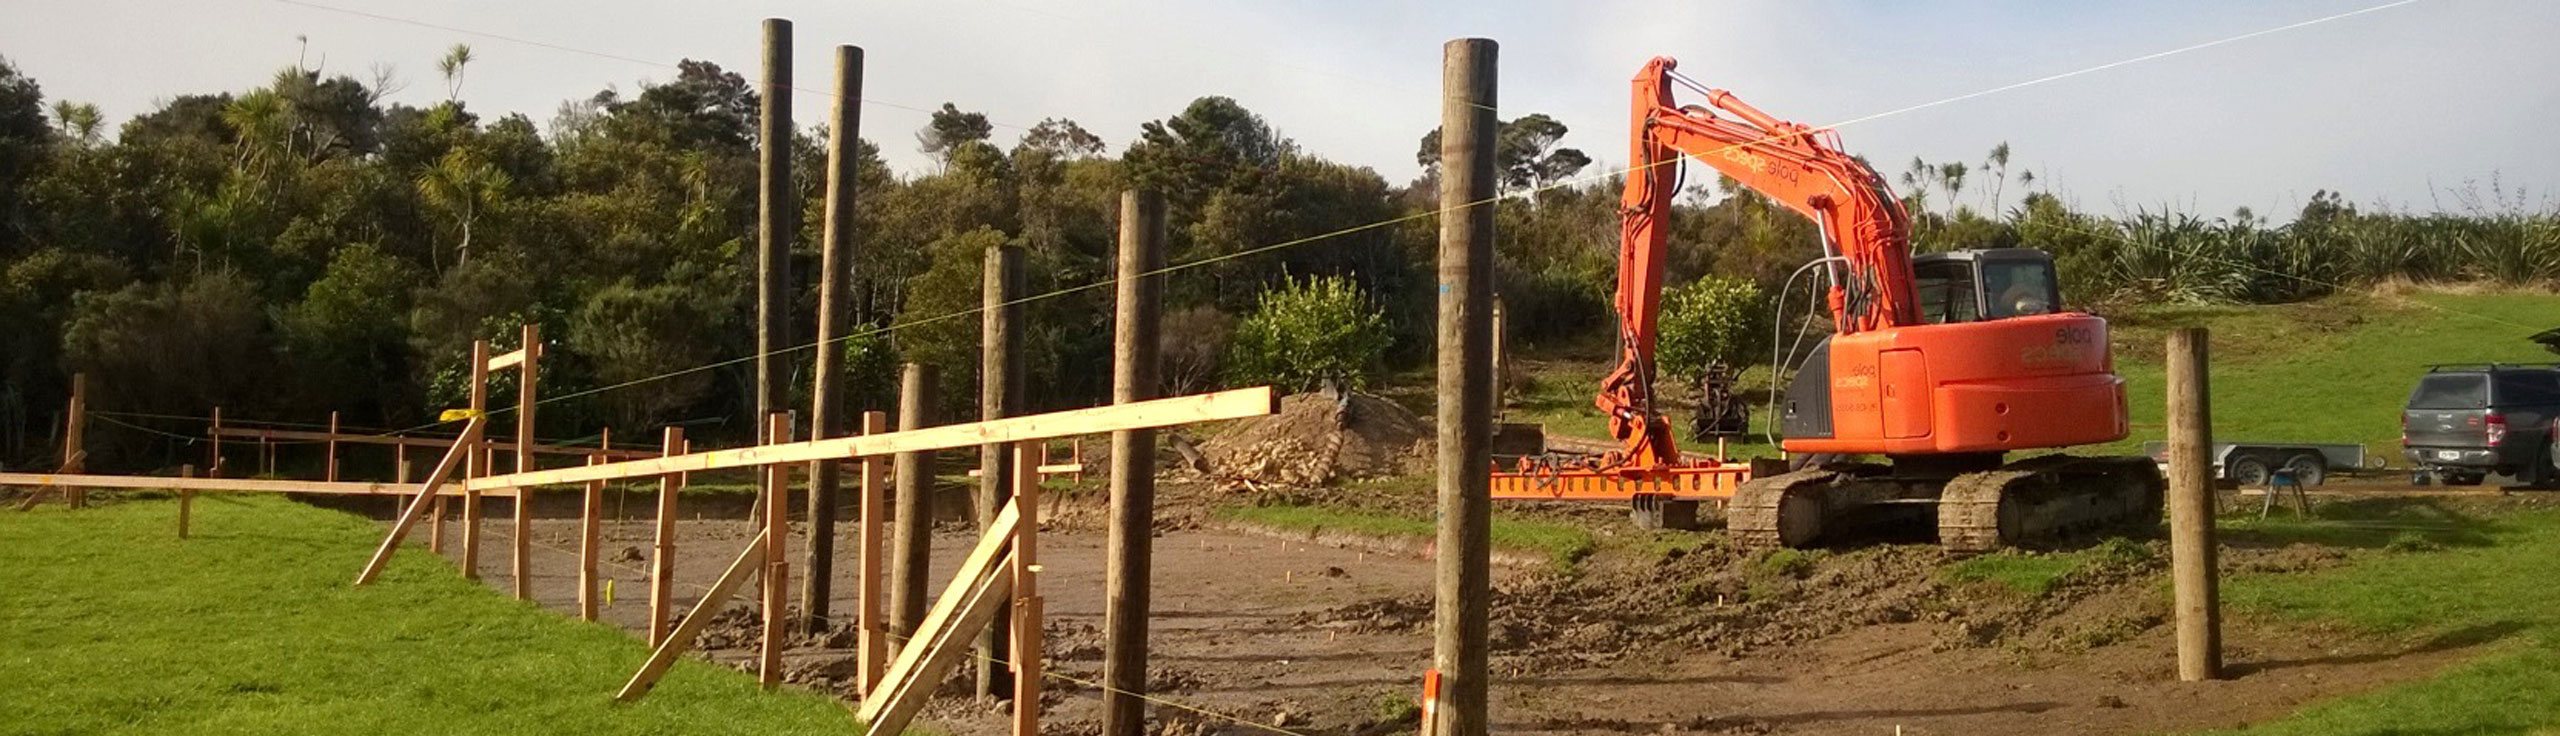 Hydraulic excavator prepares building platform after completion of geotech report.